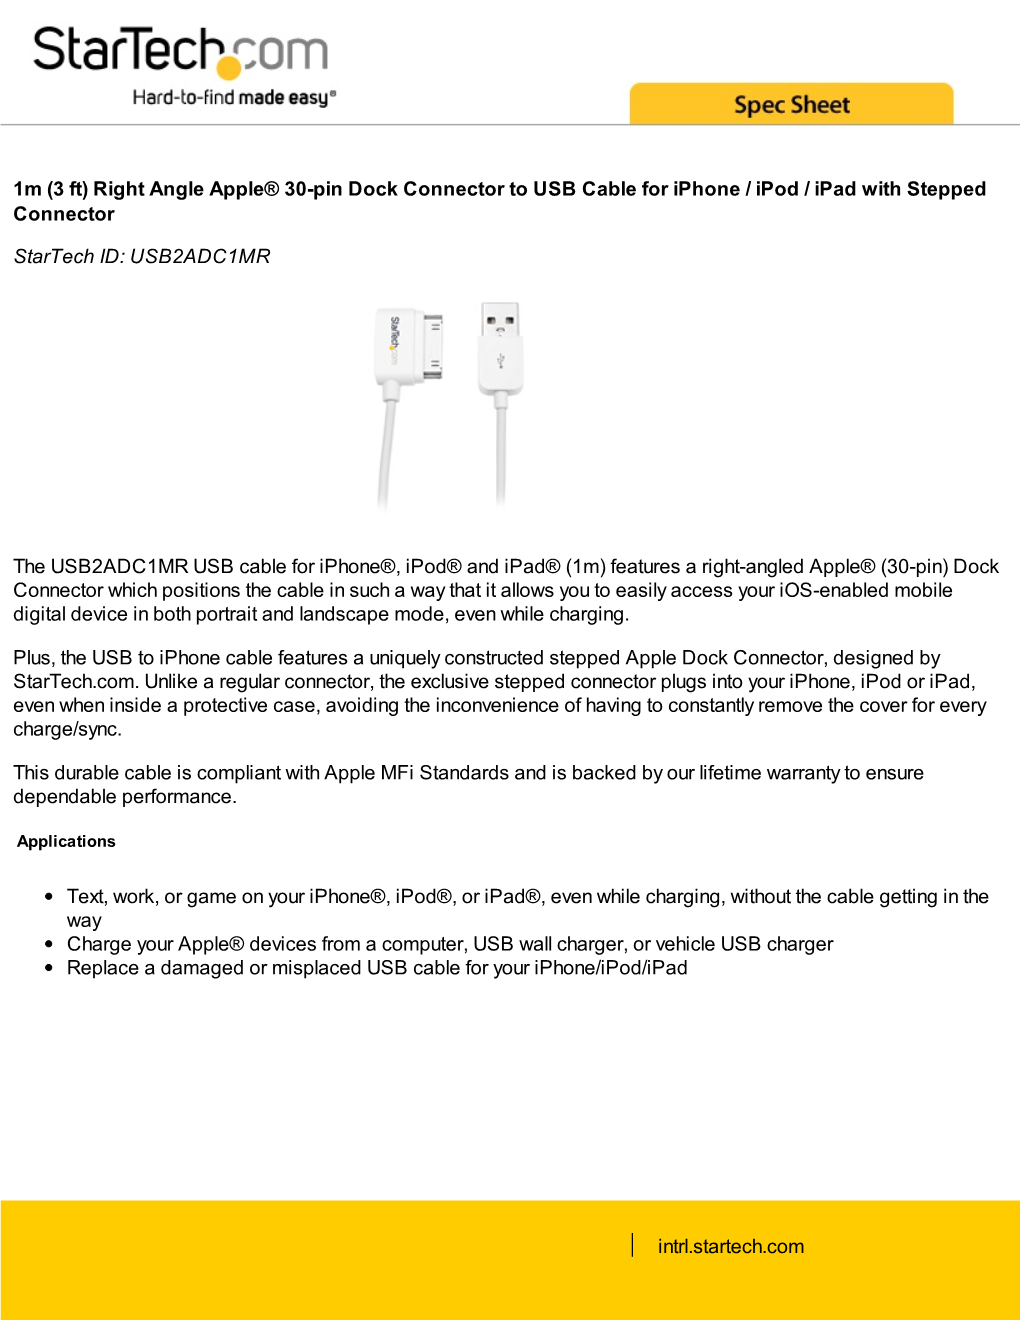 Right Angle Apple® 30-Pin Dock Connector to USB Cable for Iphone / Ipod / Ipad with Stepped Connector